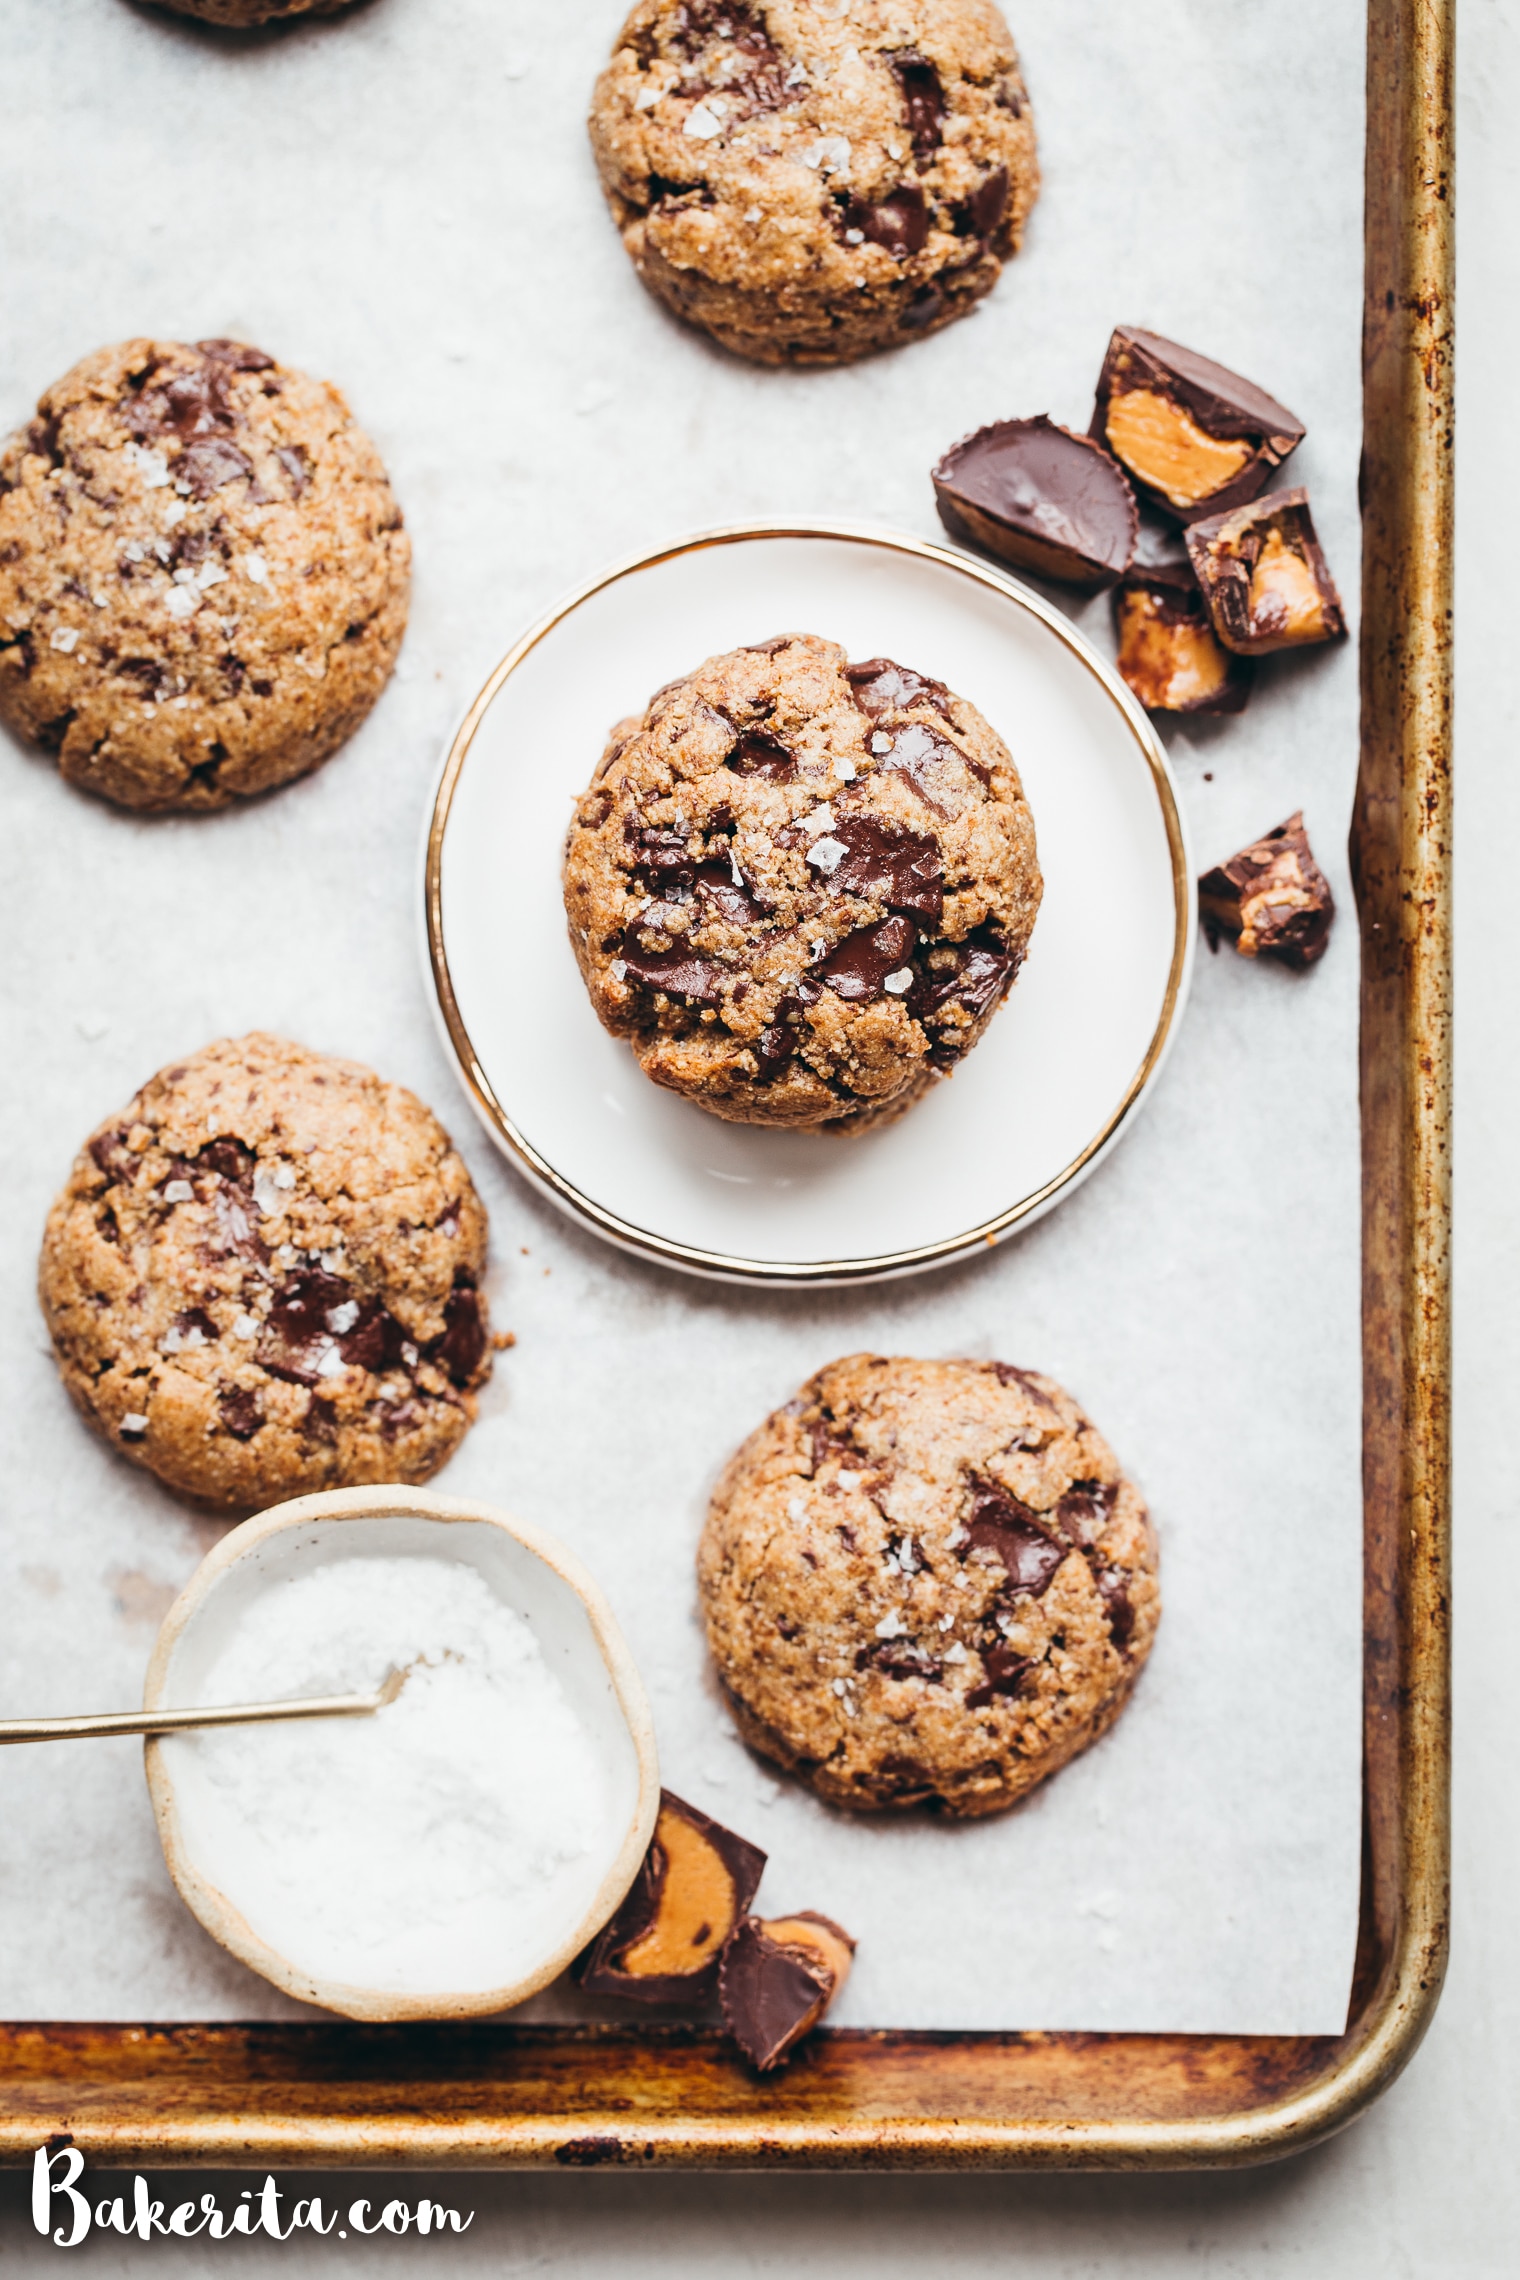 You need to try these delicious Peanut Butter Chocolate Chip Cookies - they're full of chopped up mini peanut butter cups that we fold into the dough along with the dark chocolate chunks! You'll love these gluten-free, grain-free, refined sugar-free, and vegan cookies. 